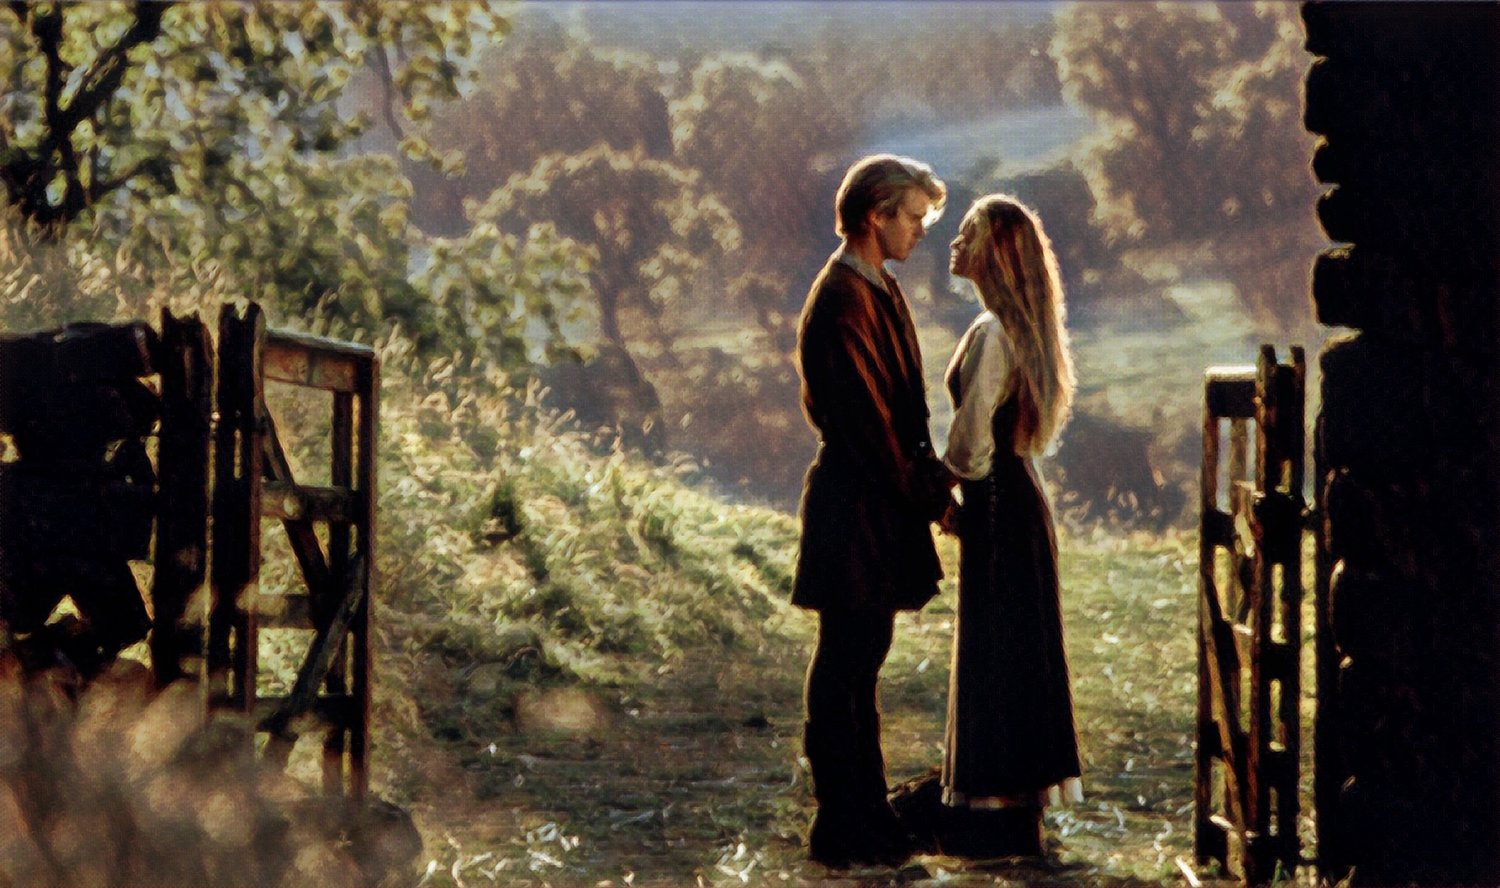 The Princess Bride, minutes 80 to 82